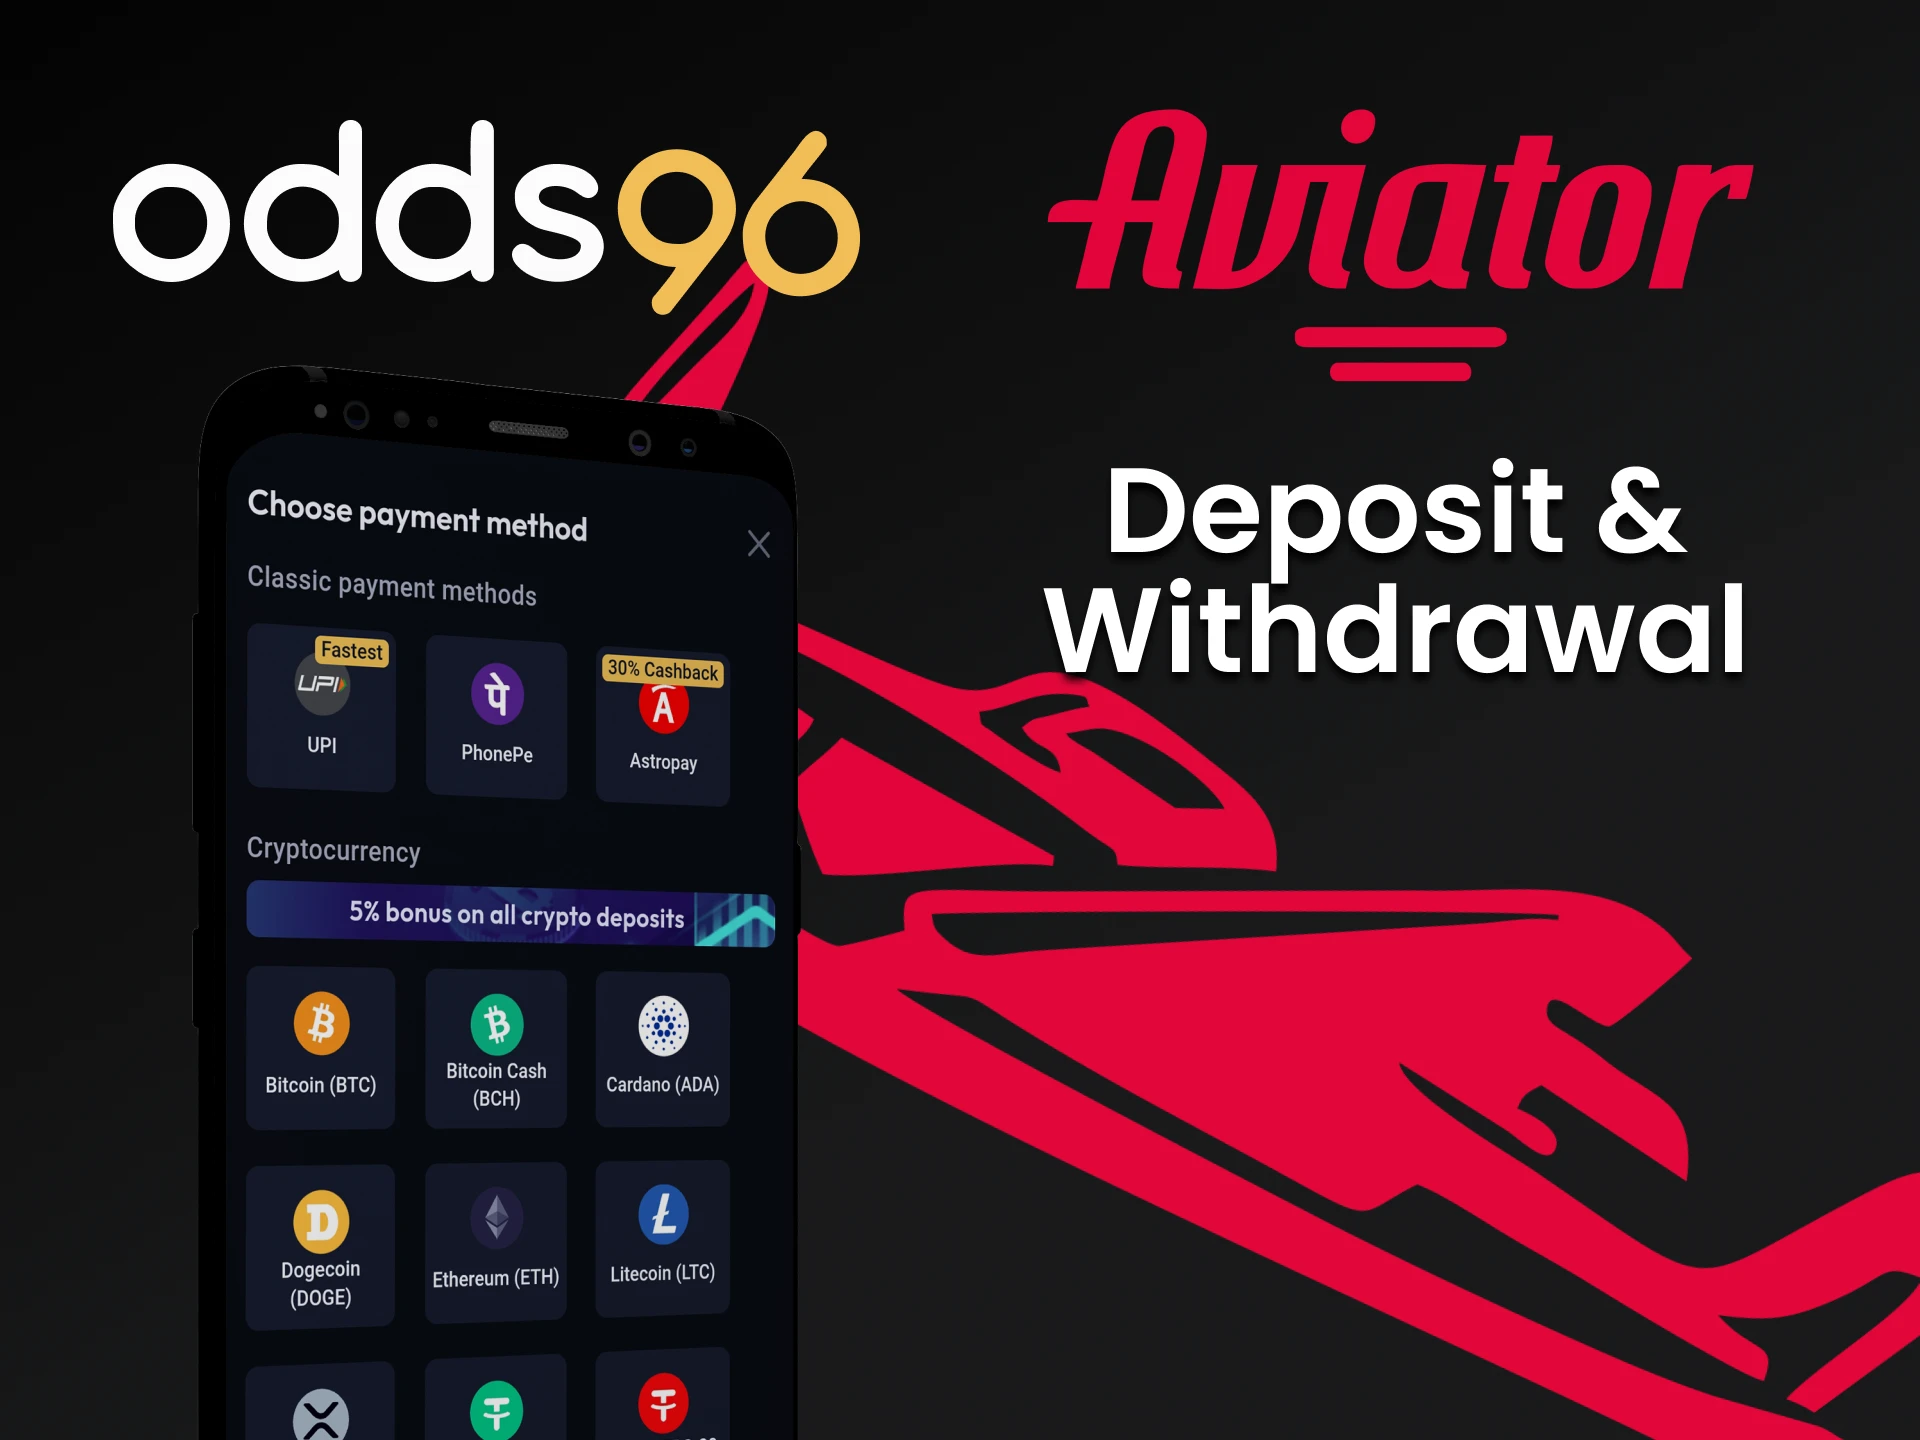 You can deposit and withdraw funds through the Odds96 app.